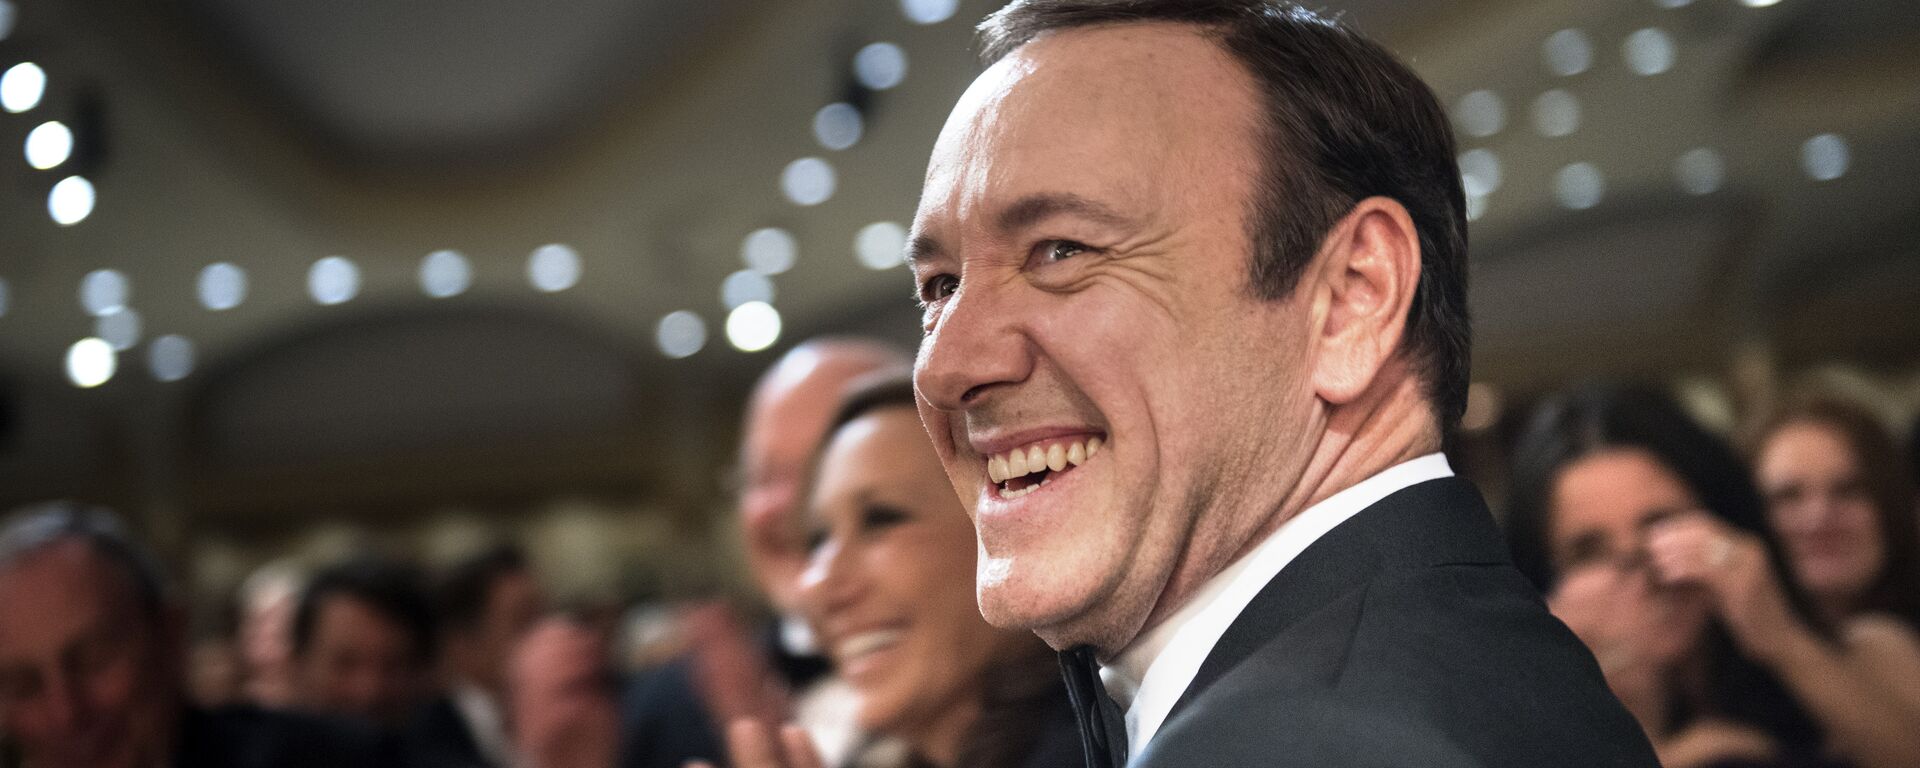 Actor Kevin Spacey laughs during the White House Correspondents’ Association Dinner April 27, 2013 in Washington, DC. Obama attended the yearly dinner which is attended by journalists, celebrities and politicians. - Sputnik Mundo, 1920, 23.05.2021